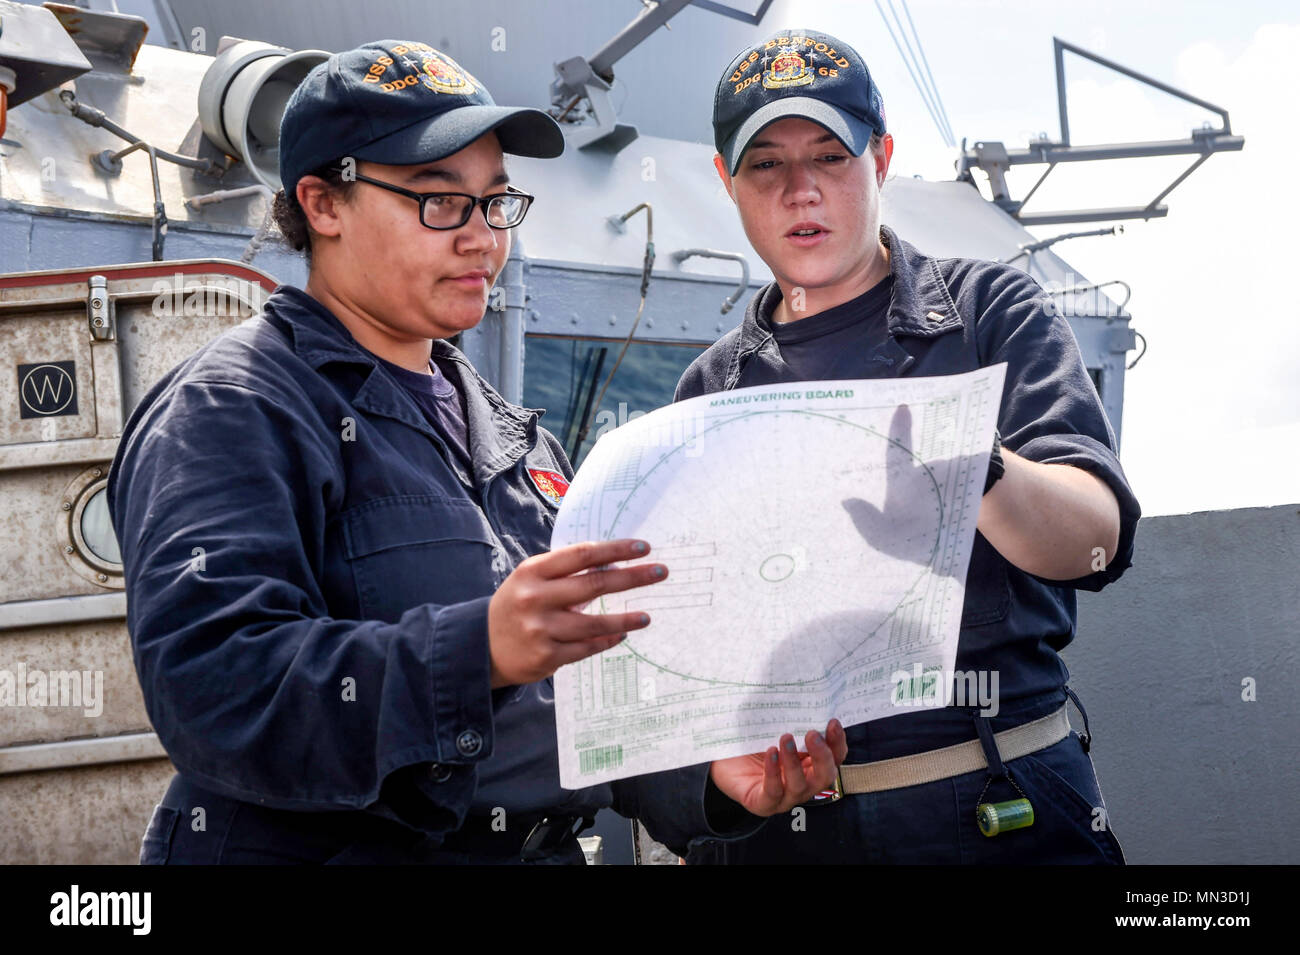 170827-N-RB168-051 PHILLIPINE SEA (Aug. 27, 2017) Lt. j.g. Emily Hannon, right, a native of Knoxville, Tennessee, and Operations Specialist Seaman Amanda Mack, a native of Lexington, Kentucky, discuss maneuvering considerations during an anti-submarine warfare exercise aboard the Arleigh Burke-class guided-missile destroyer USS Benfold (DDG 65) as part of Pacific Griffin 2017. Pacific Griffin is an exercise between the U.S. and Republic of Singapore navy (RSN), representing the enhanced capabilities of both navies to operate and work together to ensure maritime security and stability. (U.S. Na Stock Photo